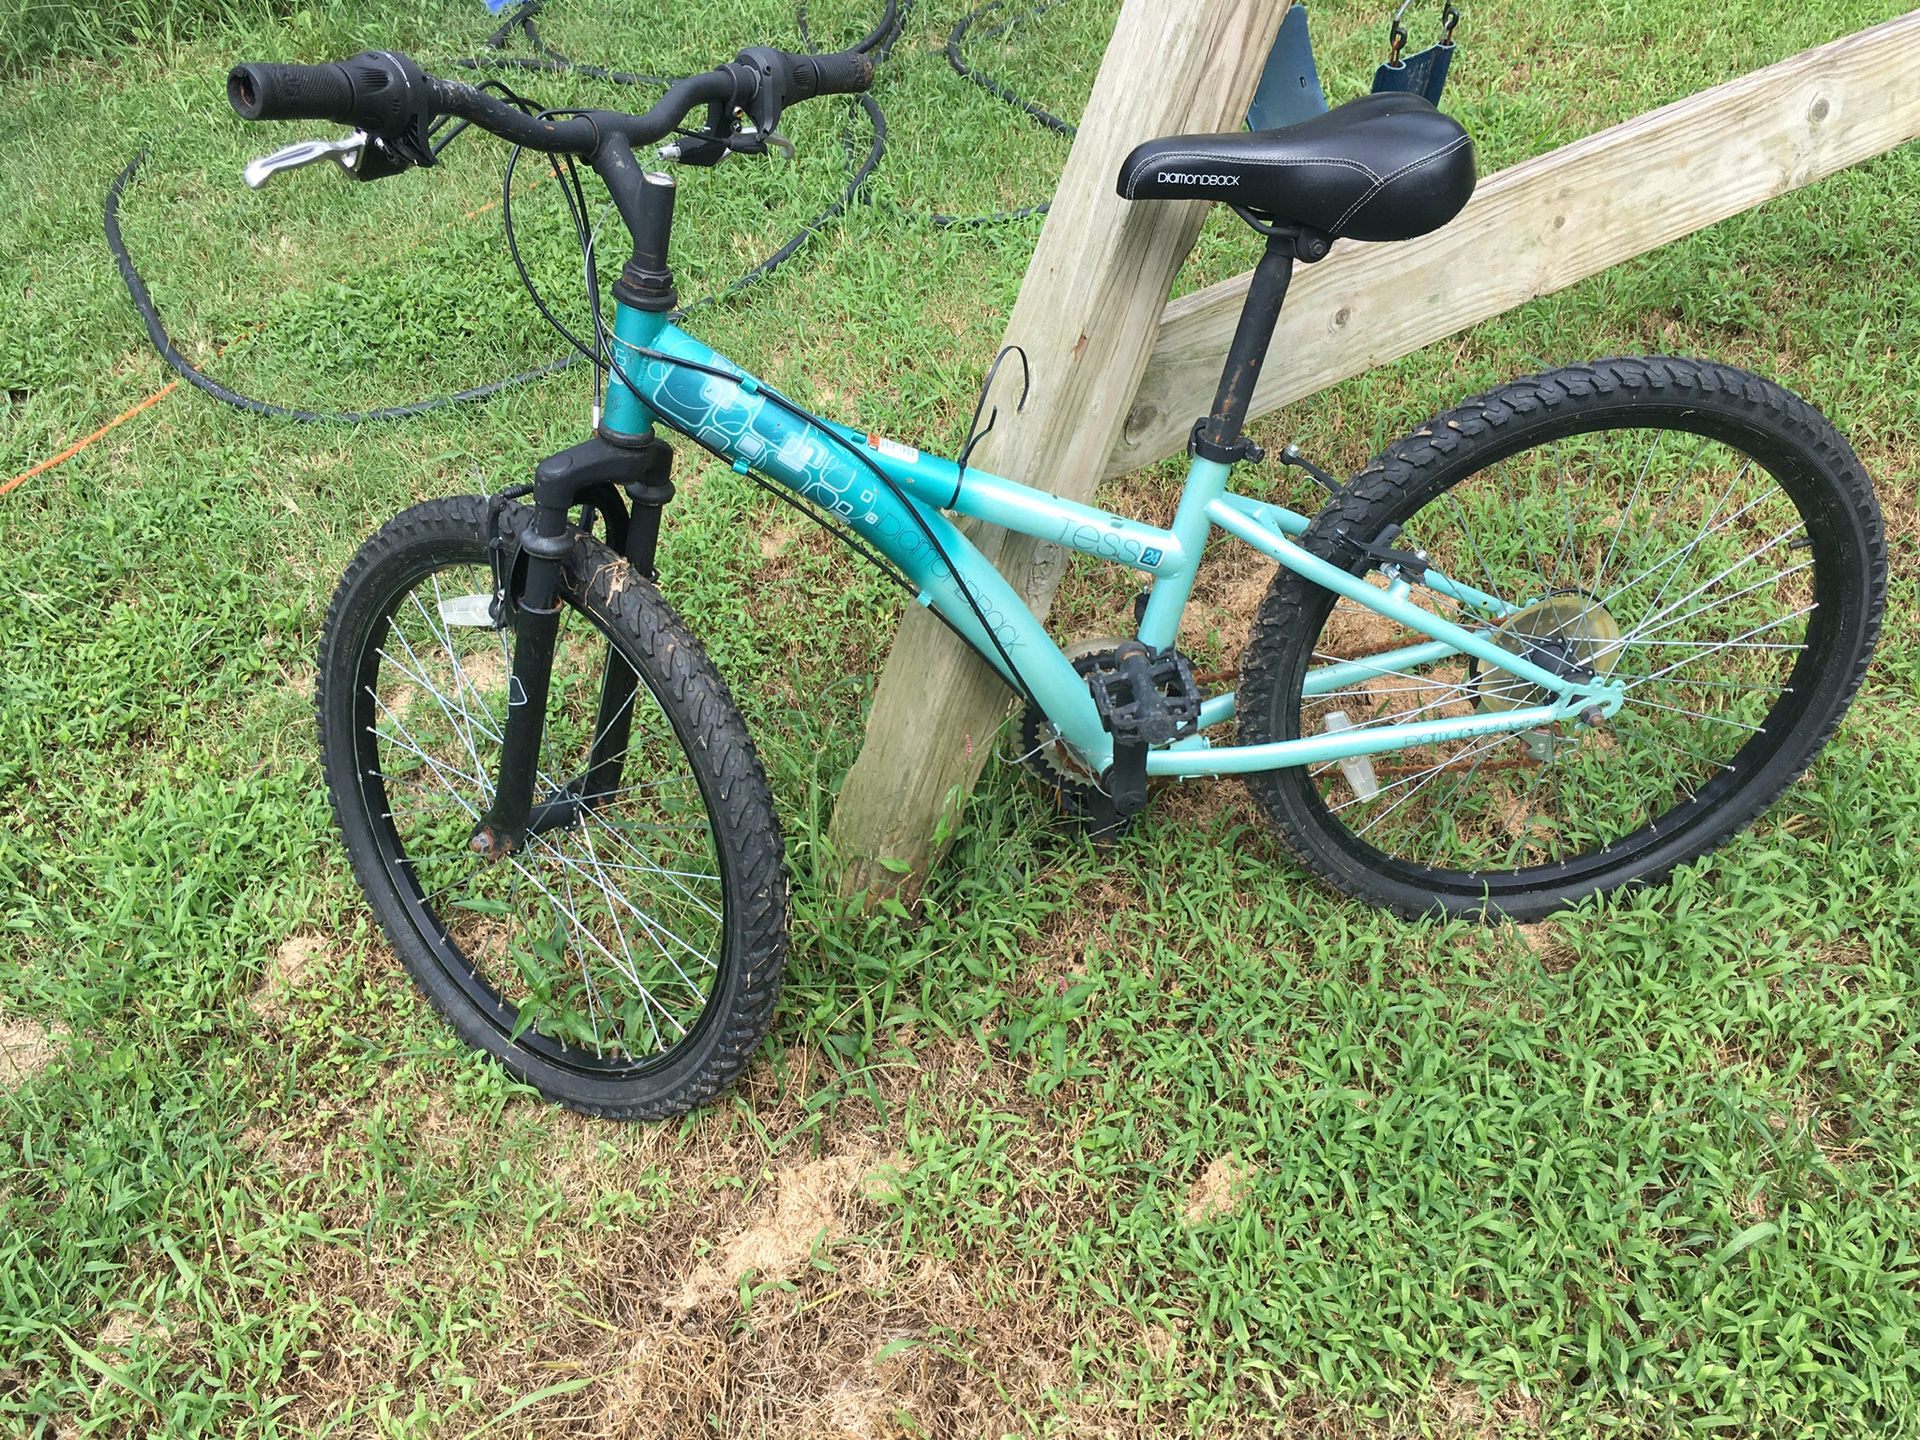 Bike nothing wrong with it that I know of. Don’t know the size but I’m 150 and I can ride it